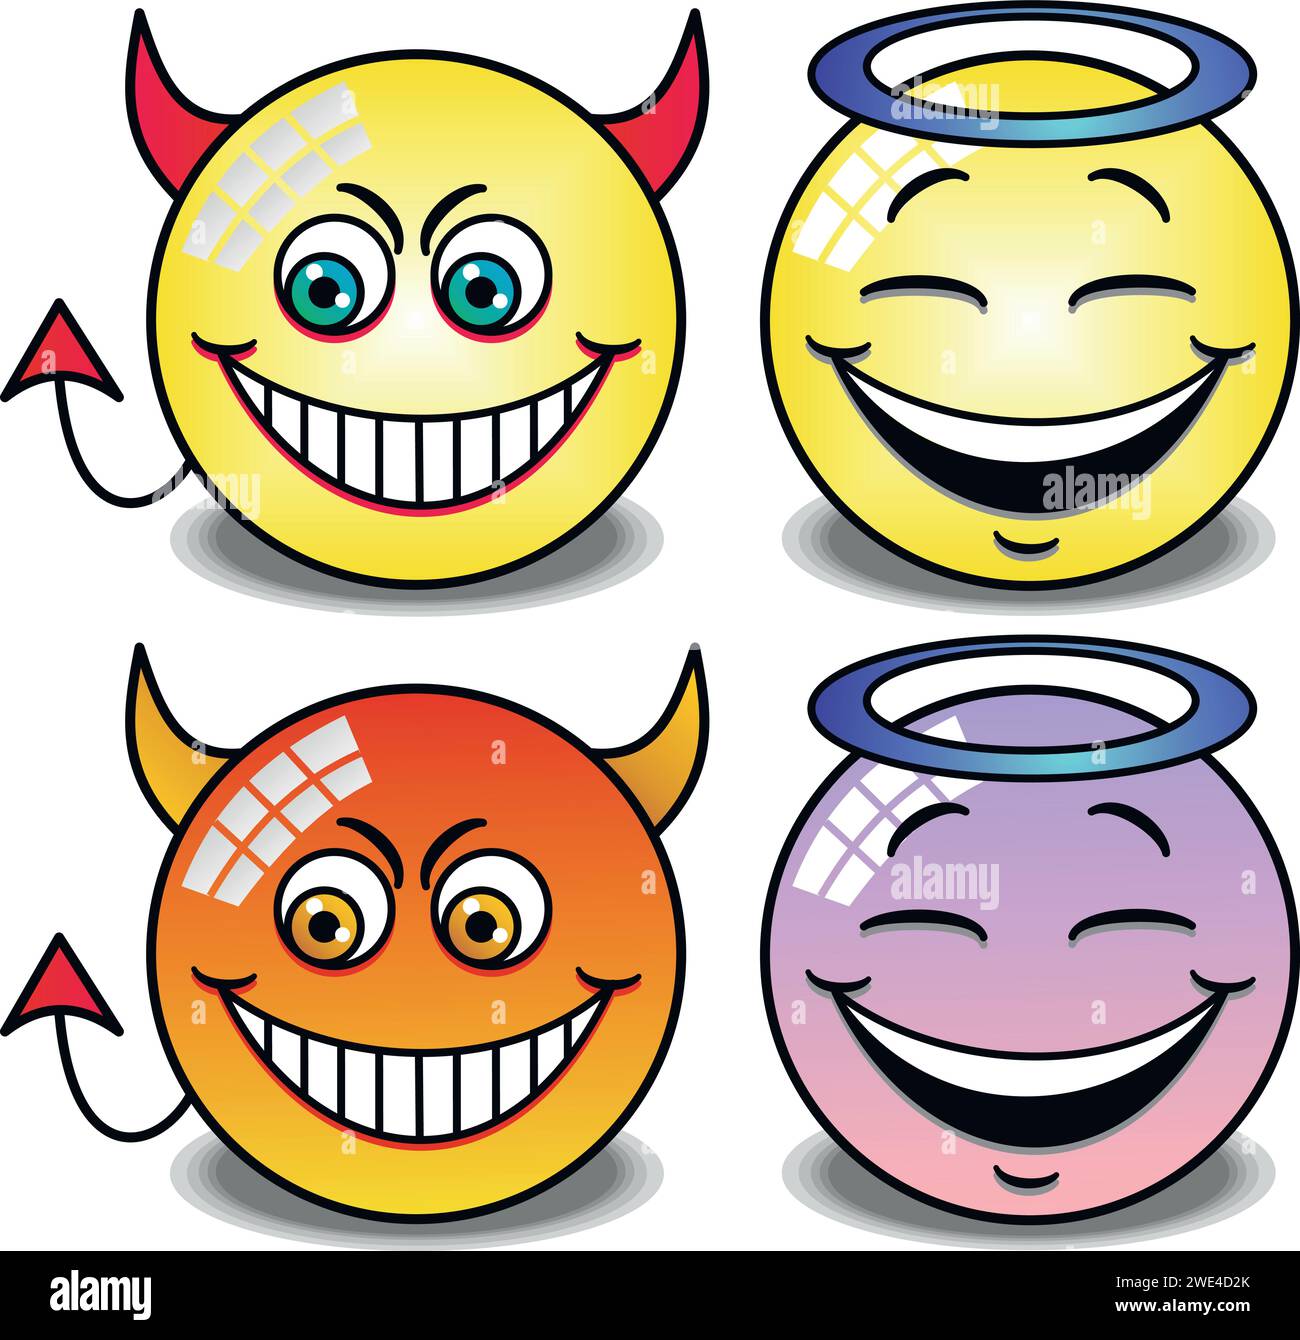 a set of smiley faces in different colors Stock Vector